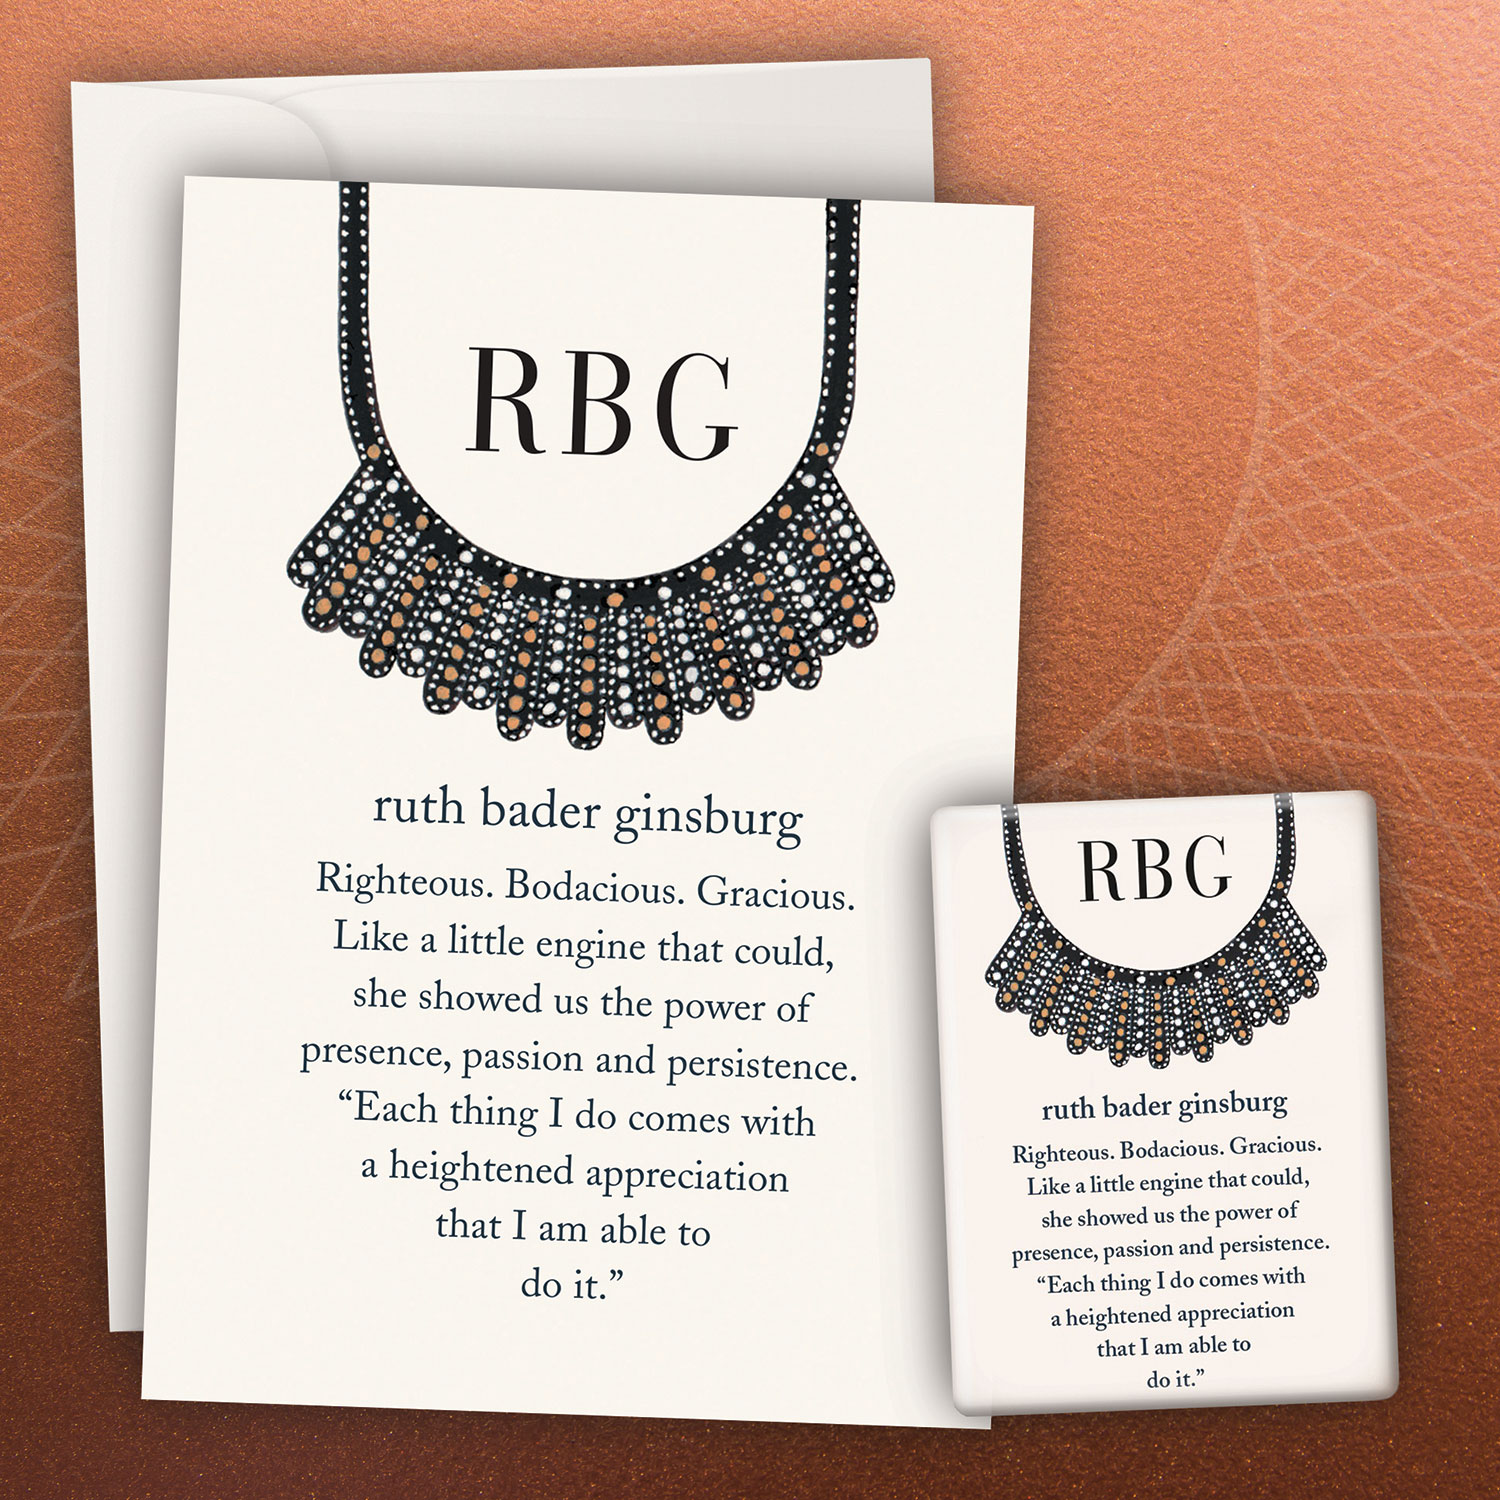 RBG Card & Magnet from Cardthartic